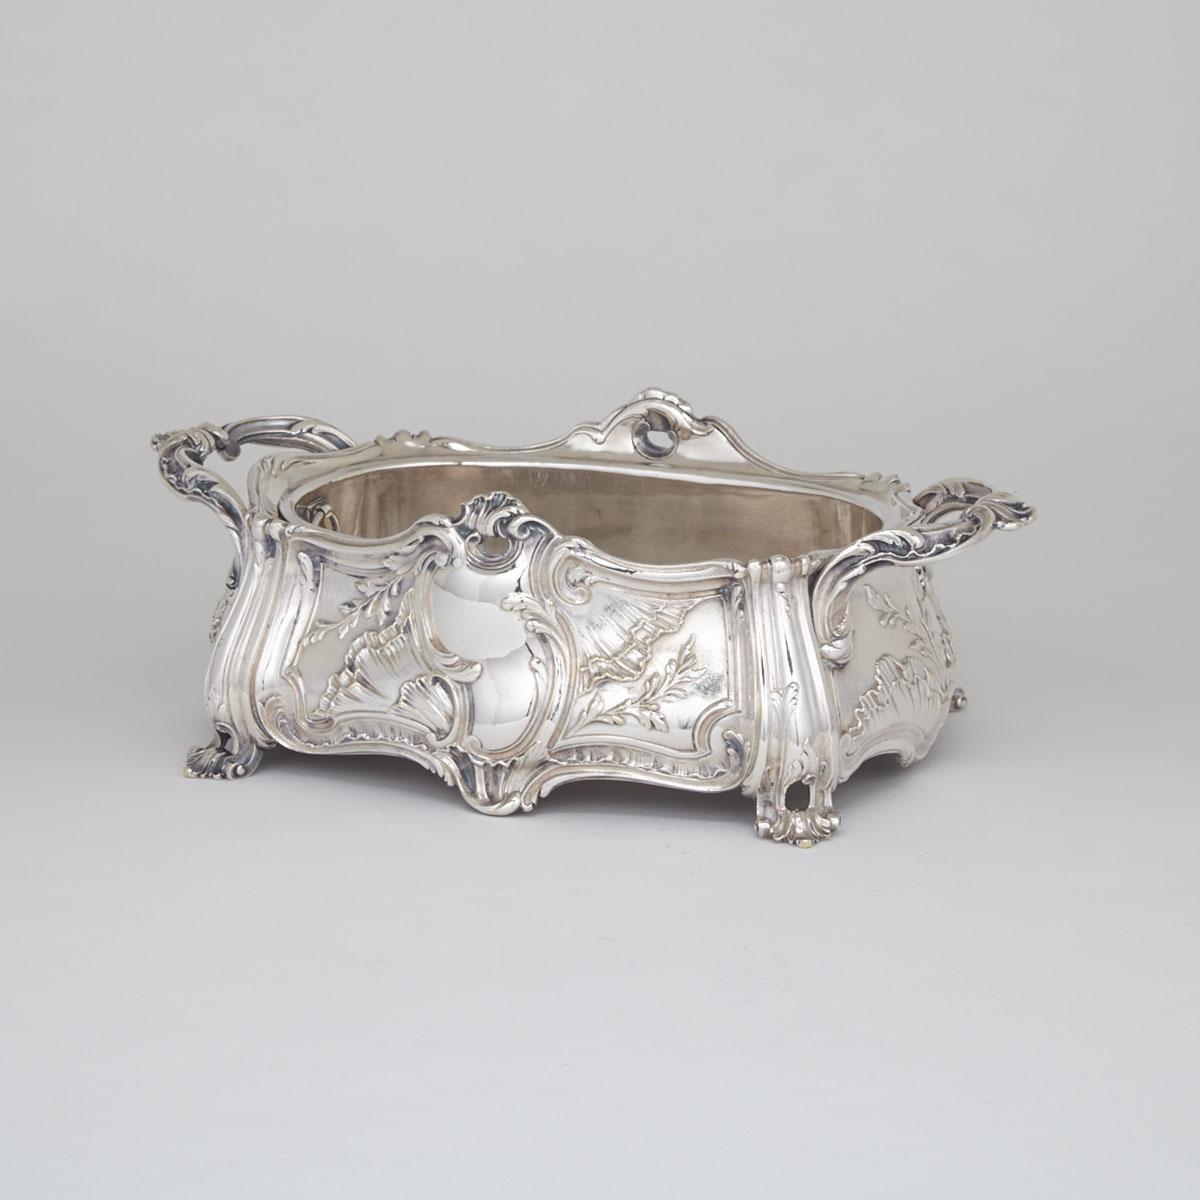 French Silver Plated Two-Handled  Centrepiece, Christofle, c.1900